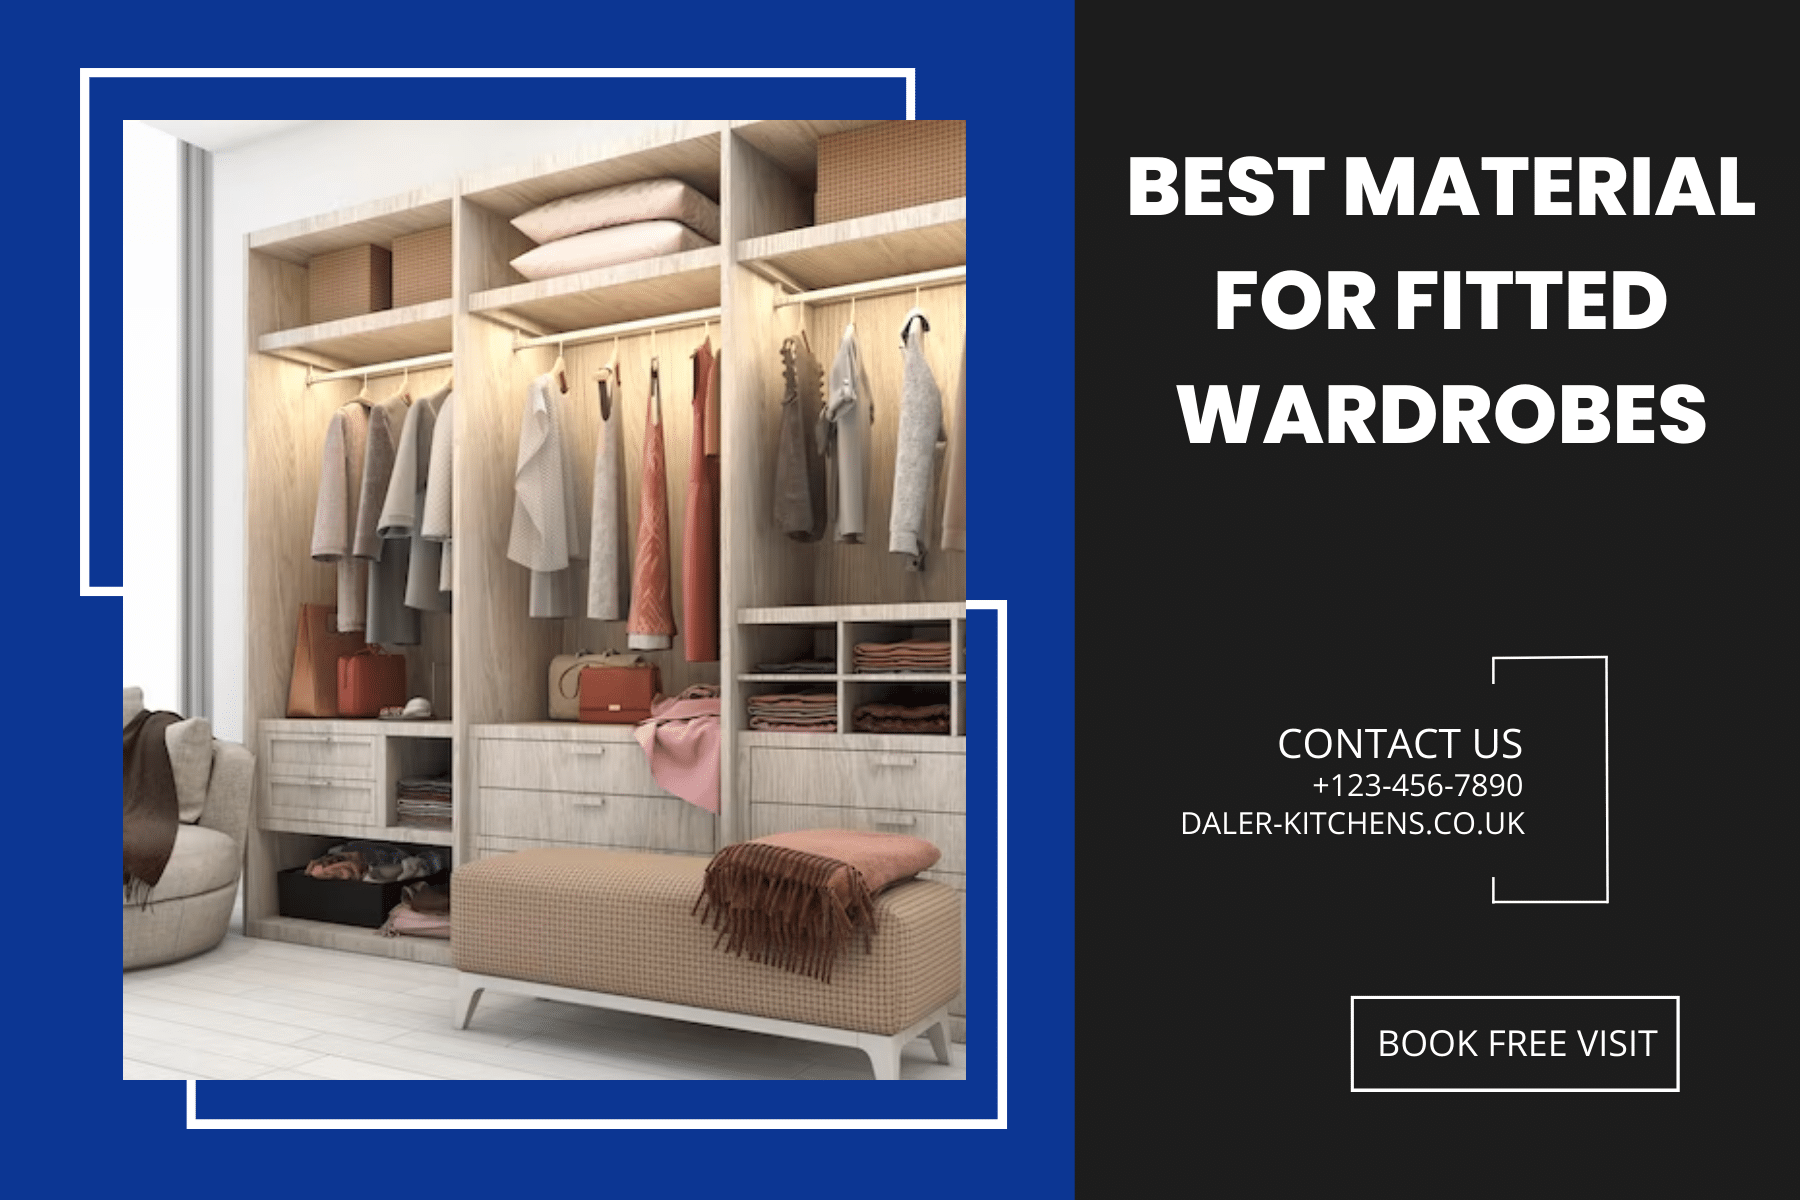 What is the best material for fitted wardrobes?